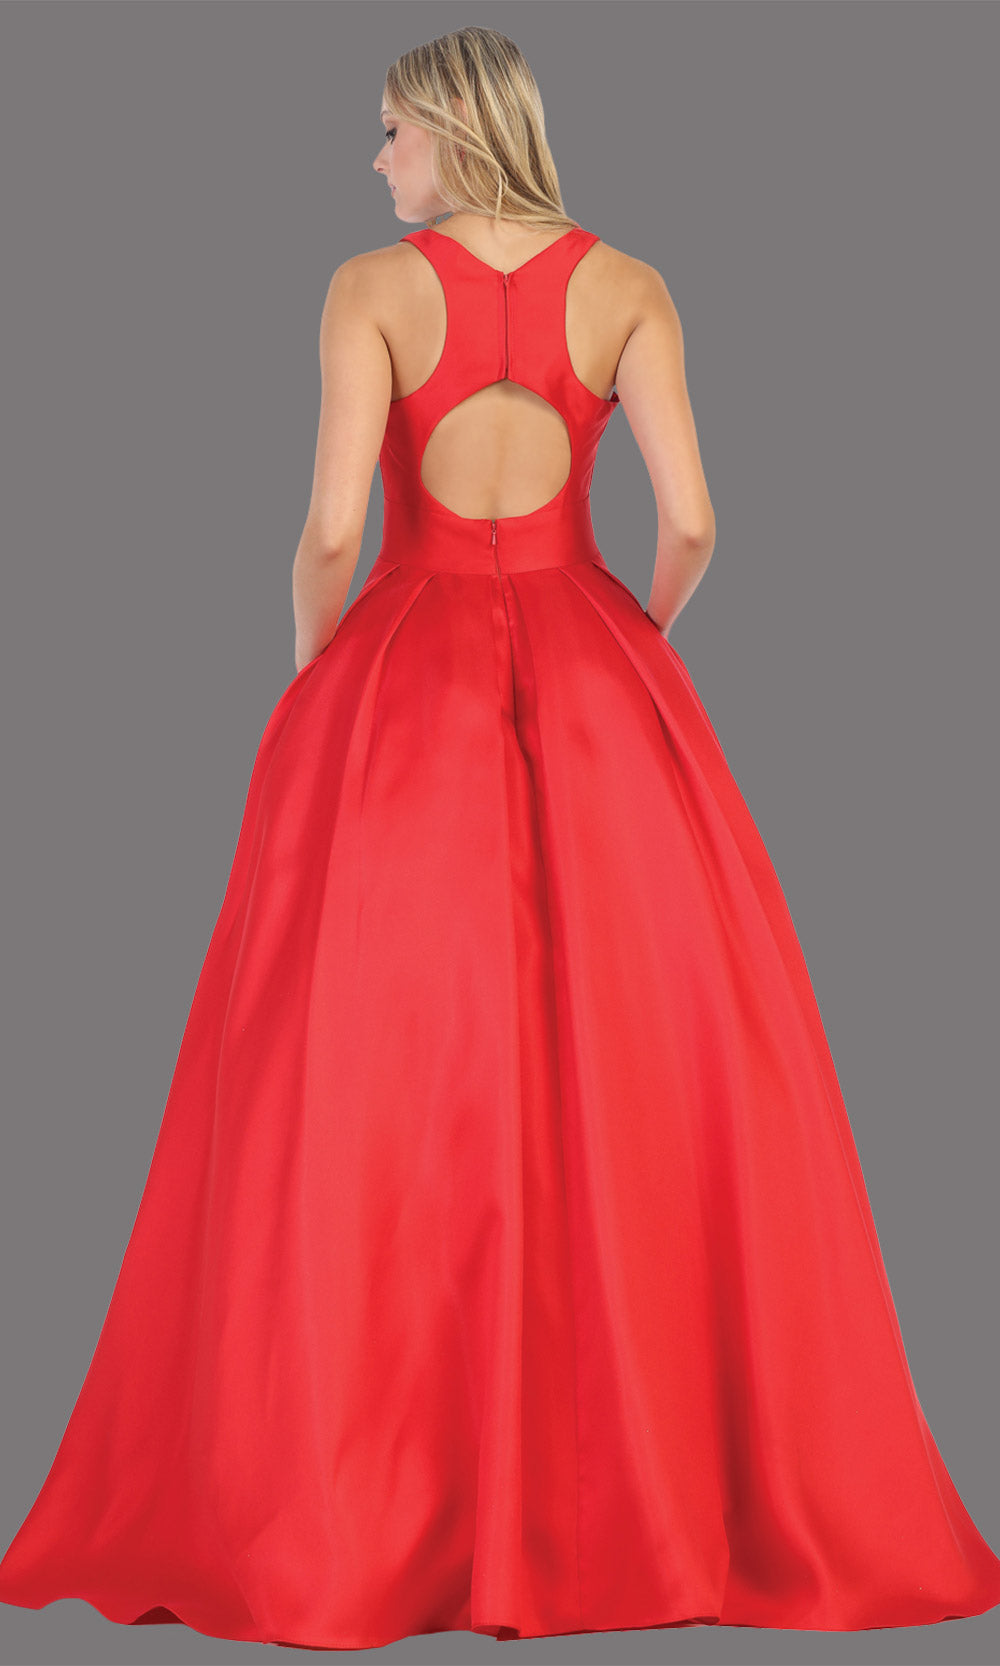 Mayqueen MQ1721-long red semi ballgown w/open back. This simple red dress is perfect for prom, engagement/e-shoot, wedding reception dress, bridesmaid dresses, formal wedding guest dress, sweet 16 dress, debut. Plus sizes avail